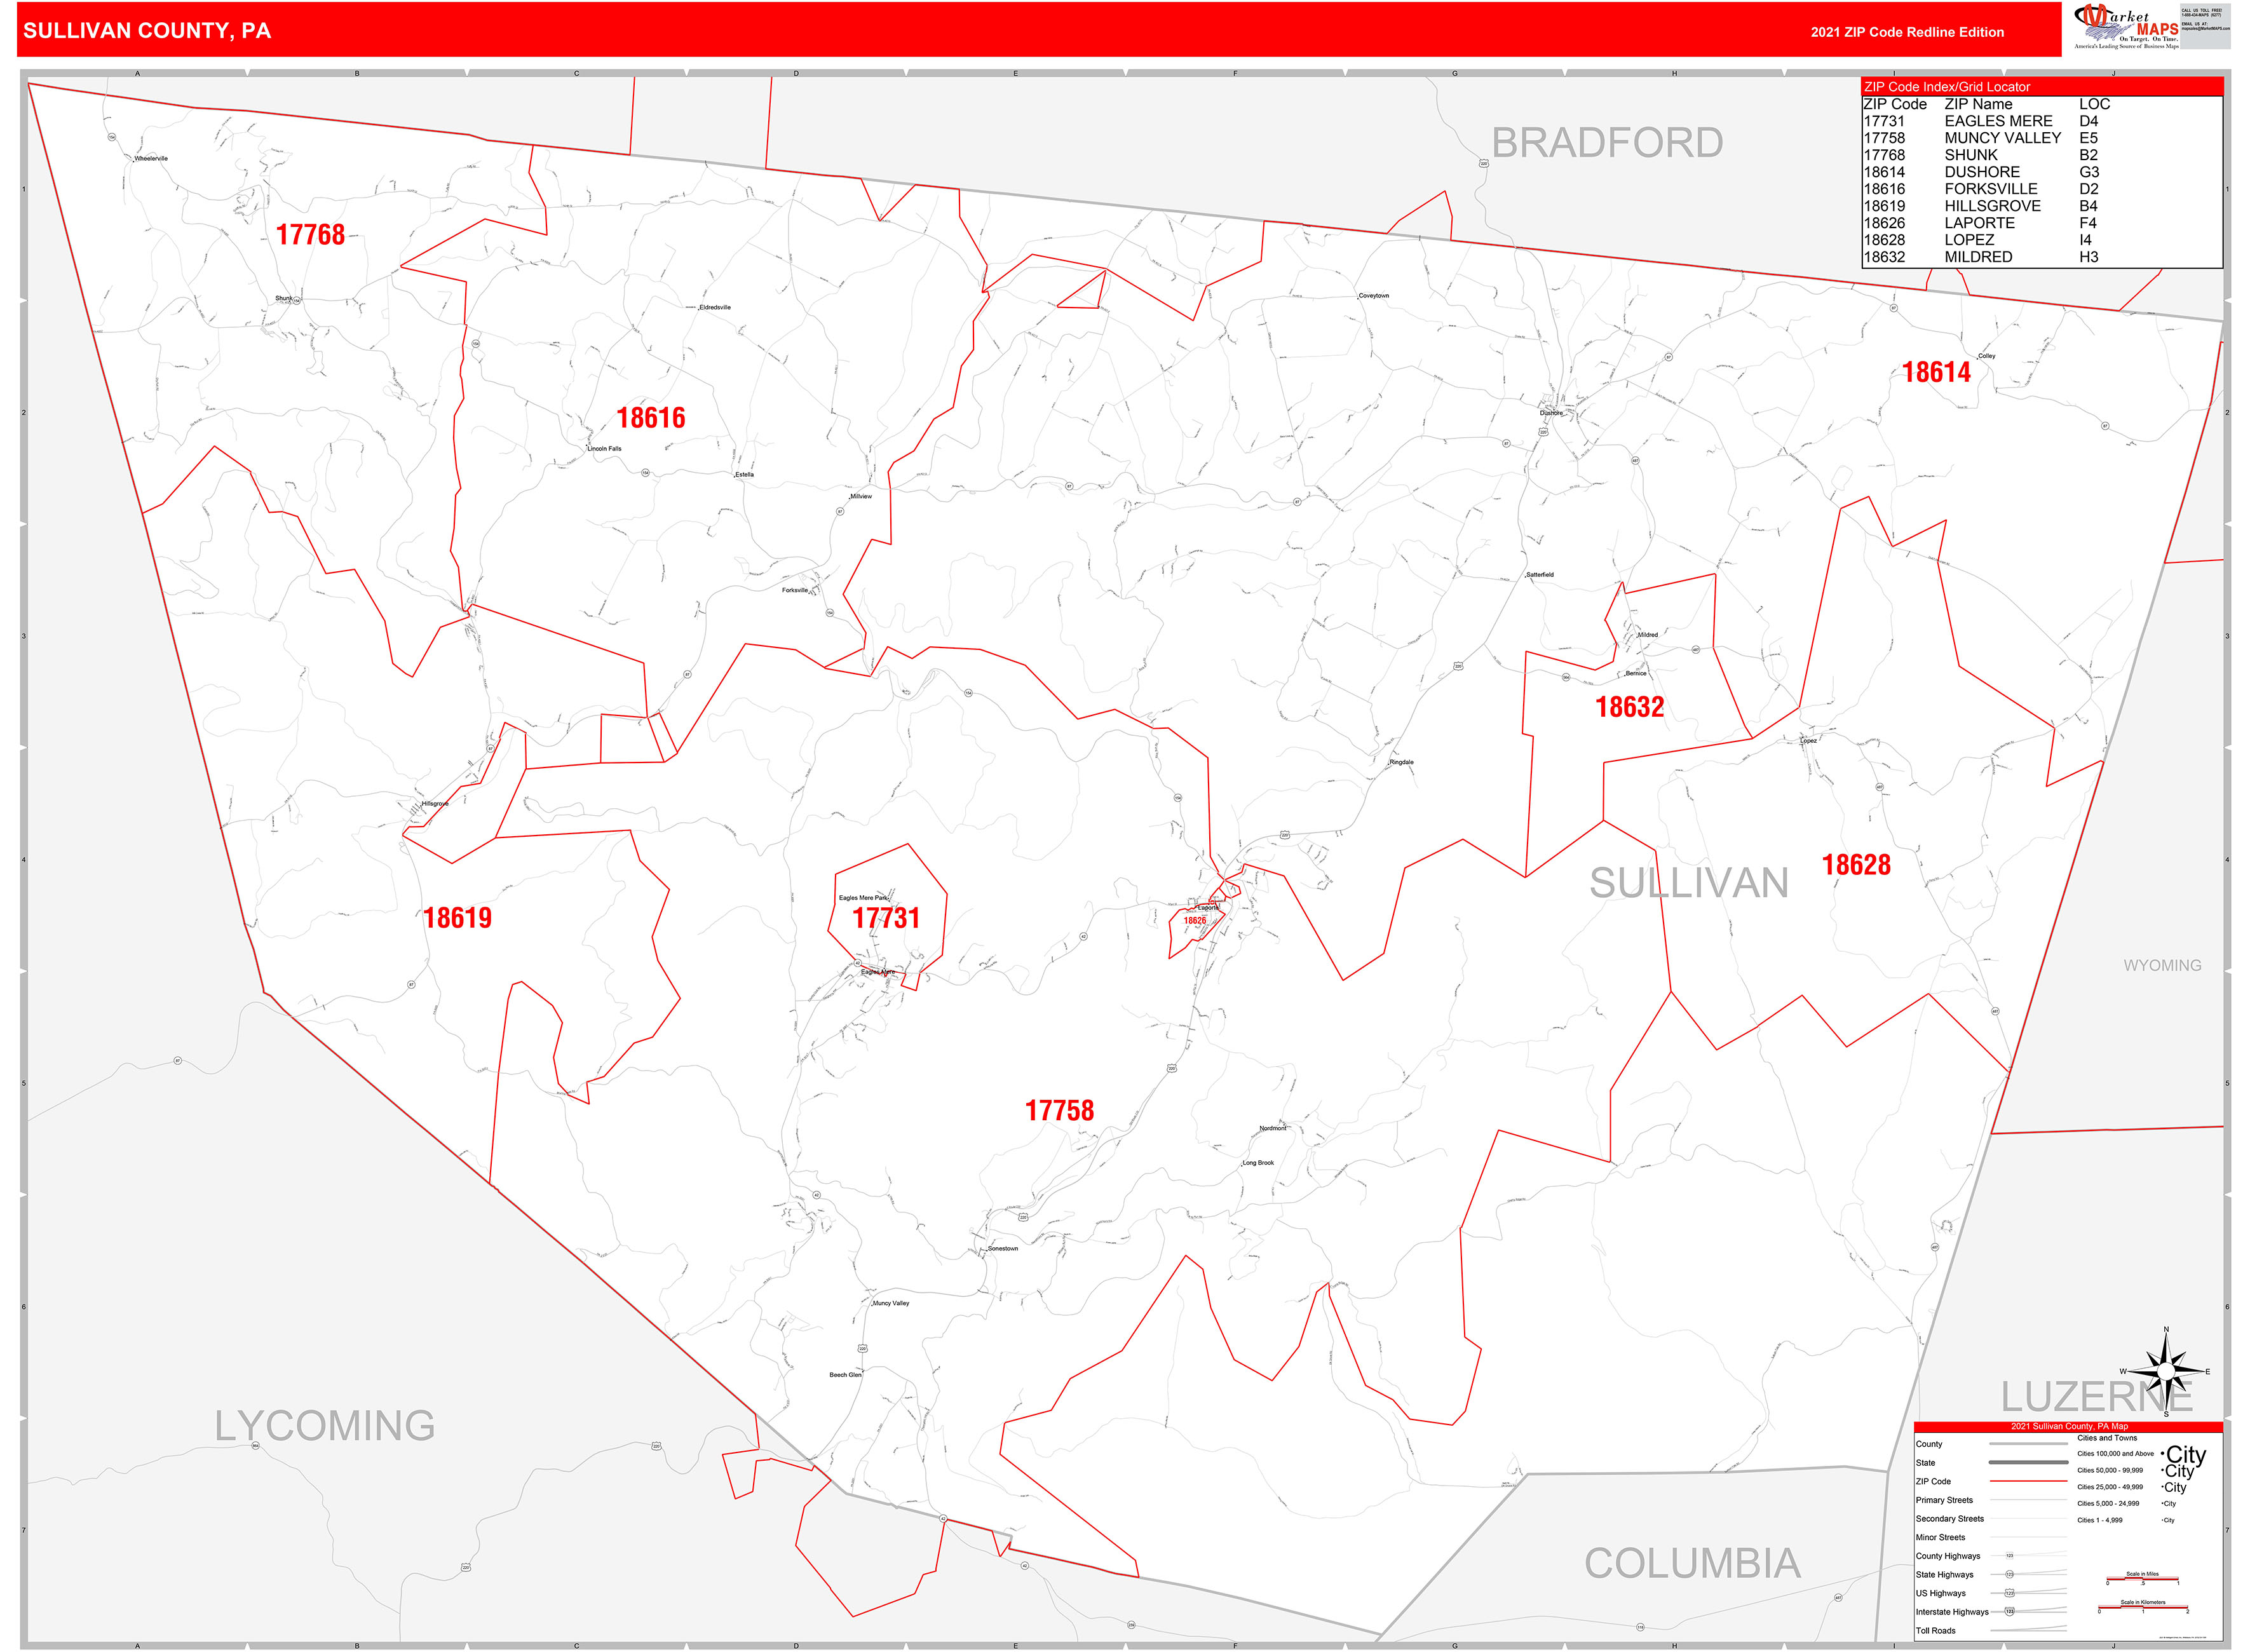 Sullivan County, PA Zip Code Wall Map Red Line Style by MarketMAPS ...